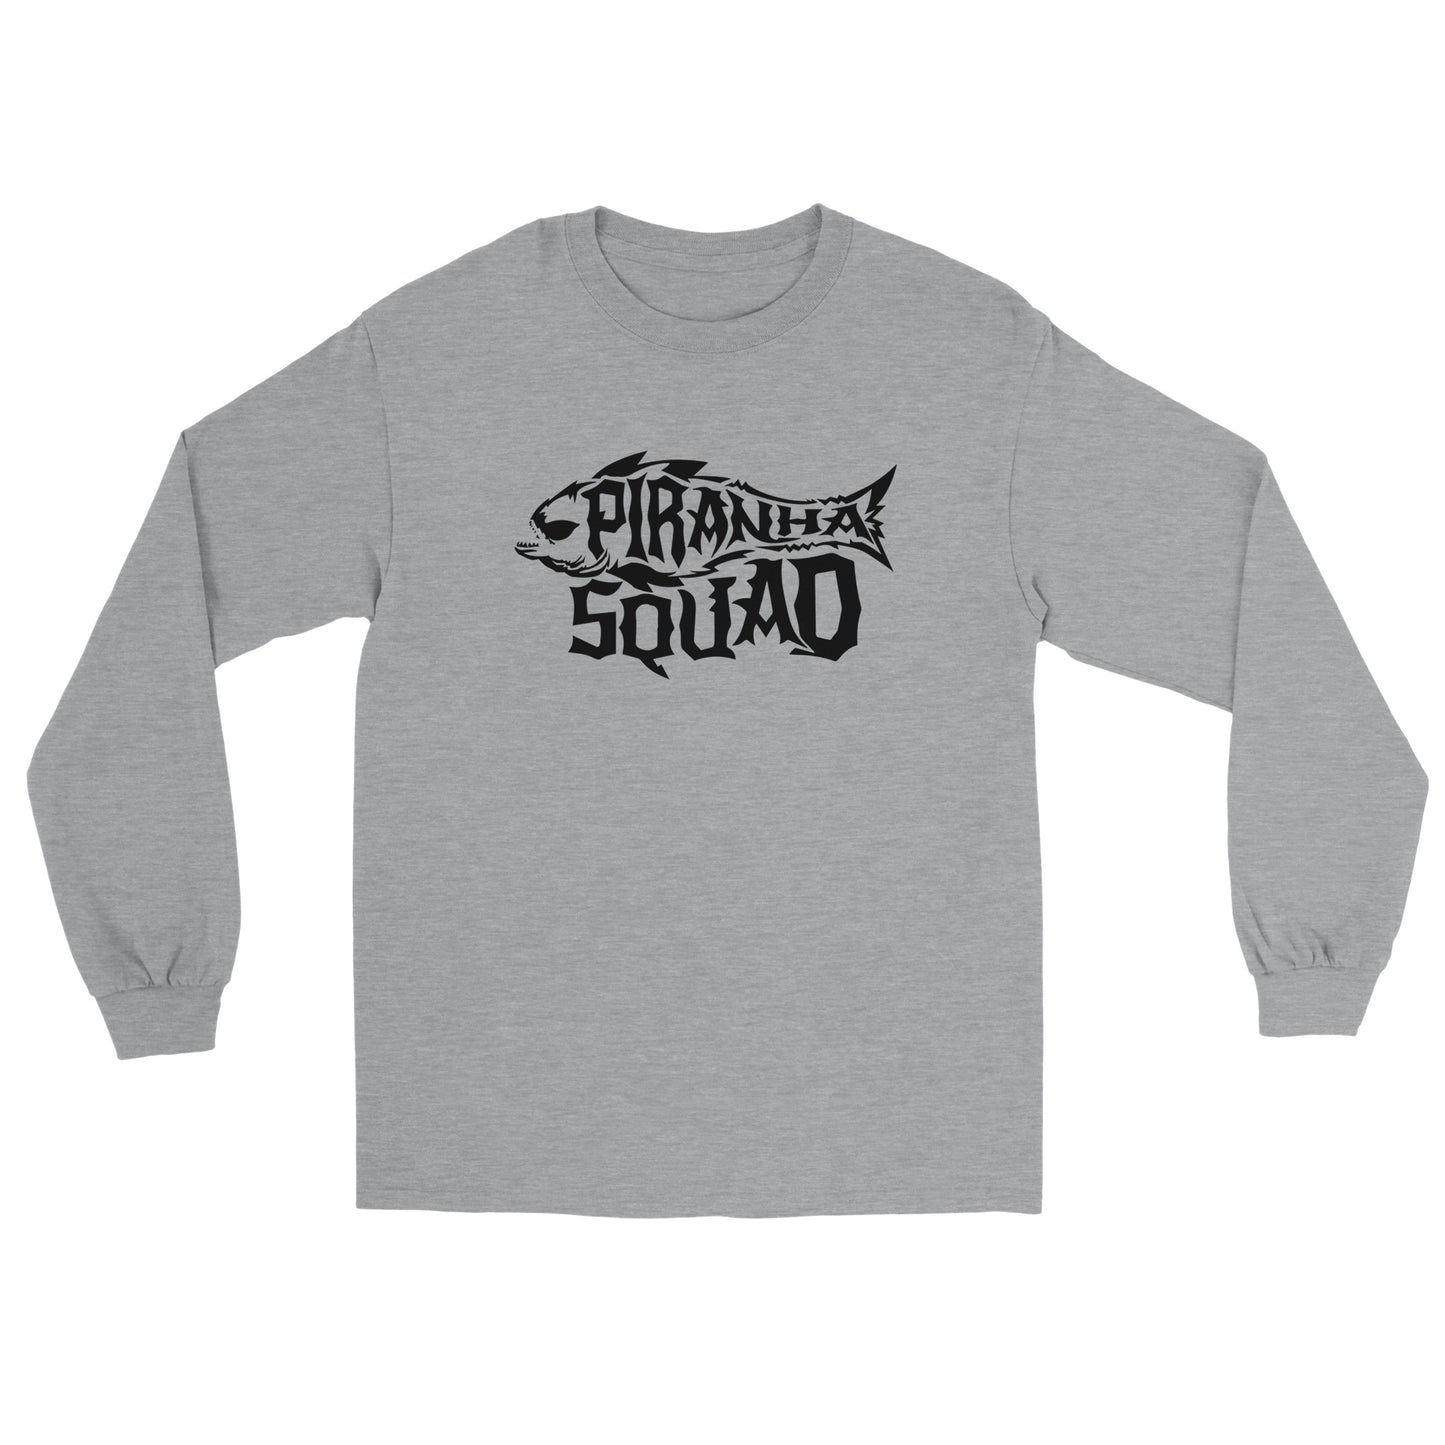 a gray long sleeve shirt with the words,'pirates squad'on it